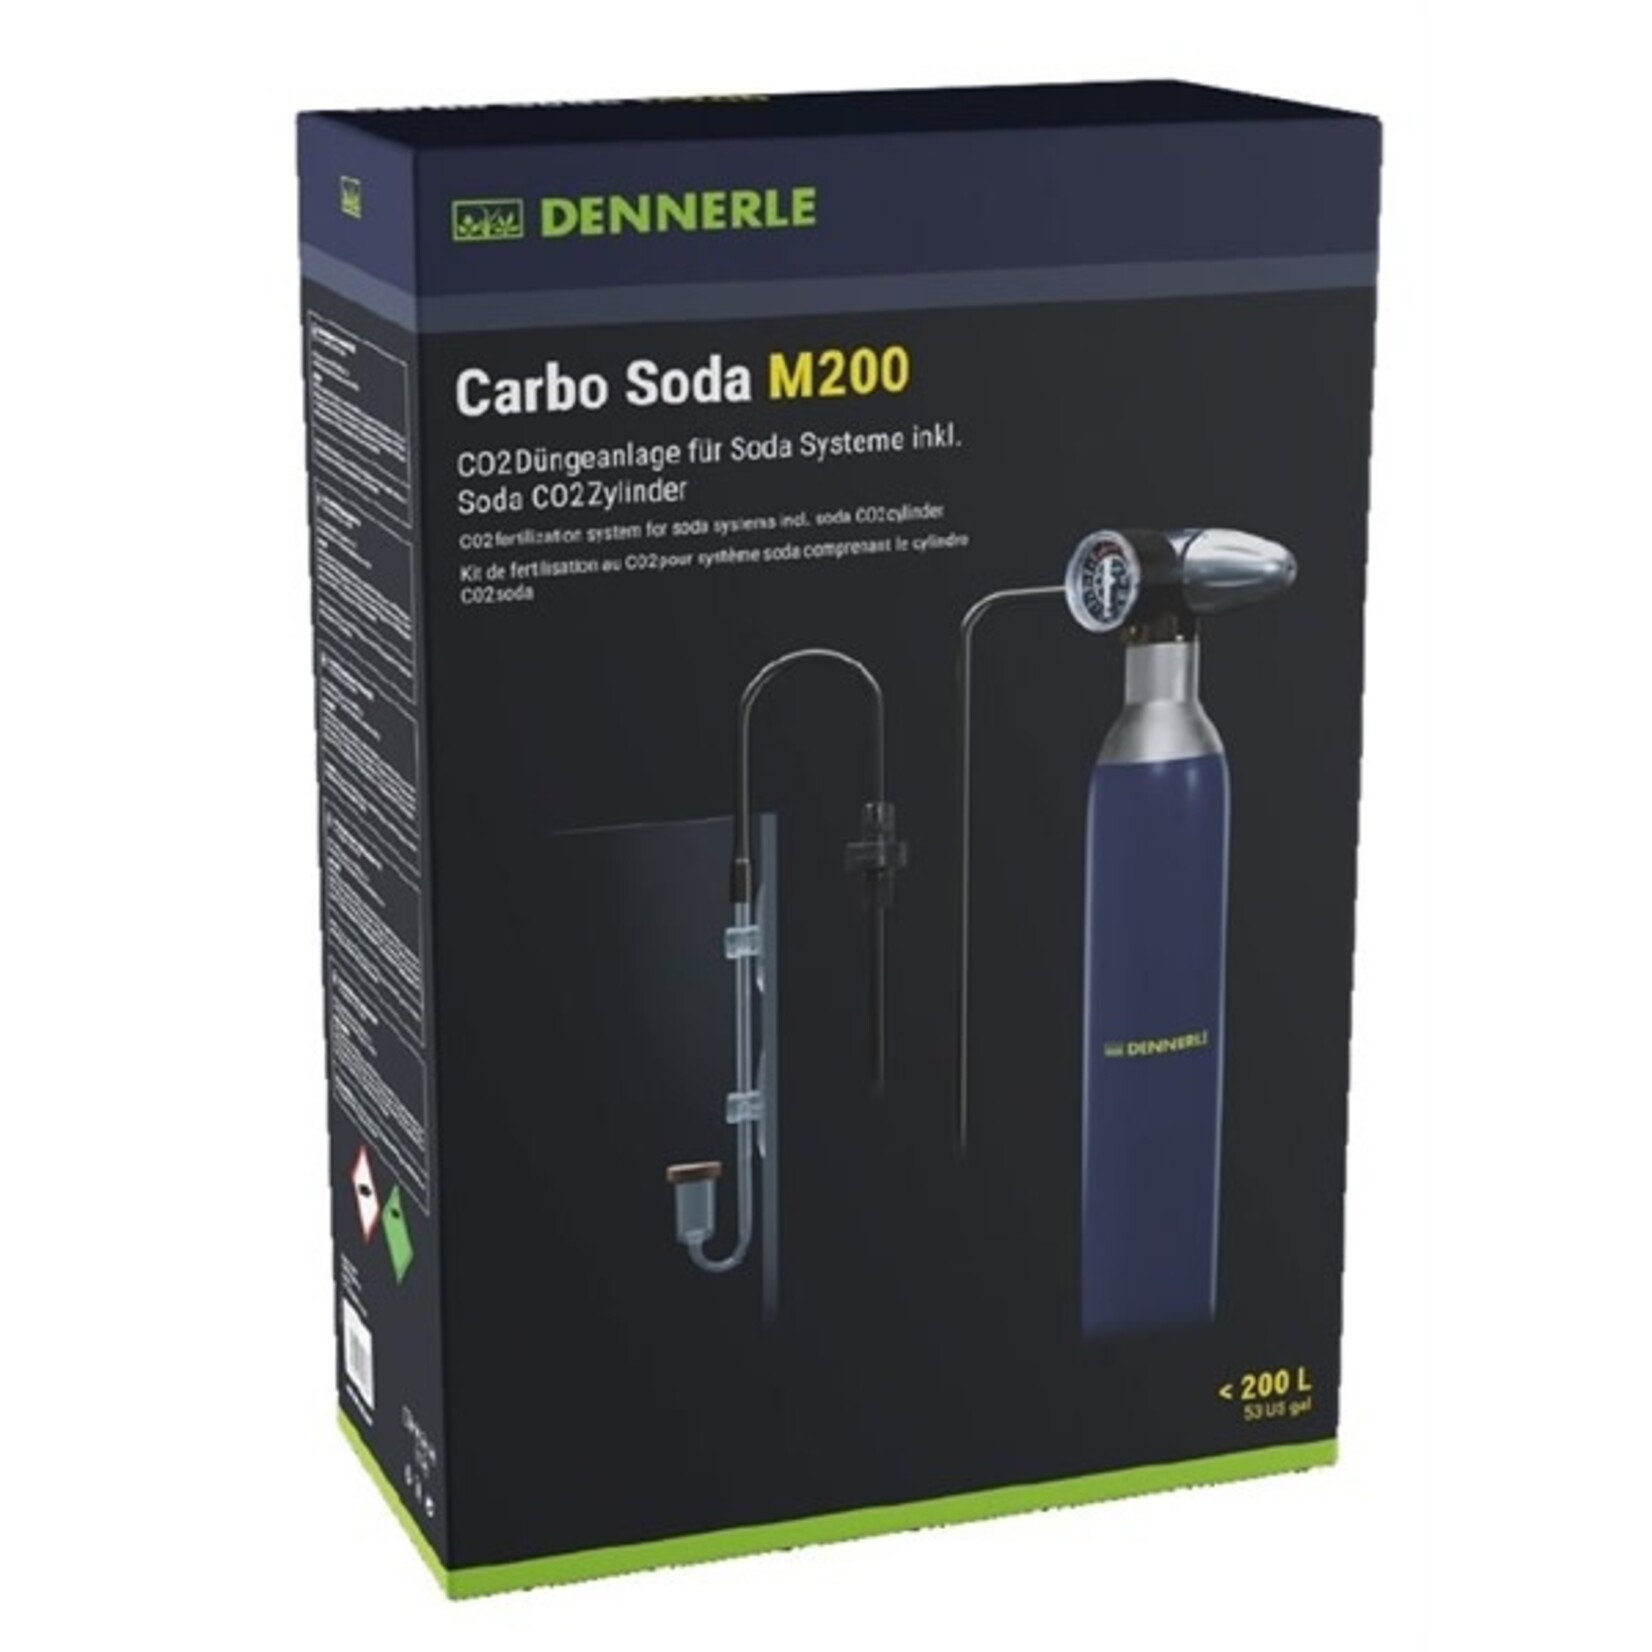 Dennerle DENNERLE CARBO SODA M200